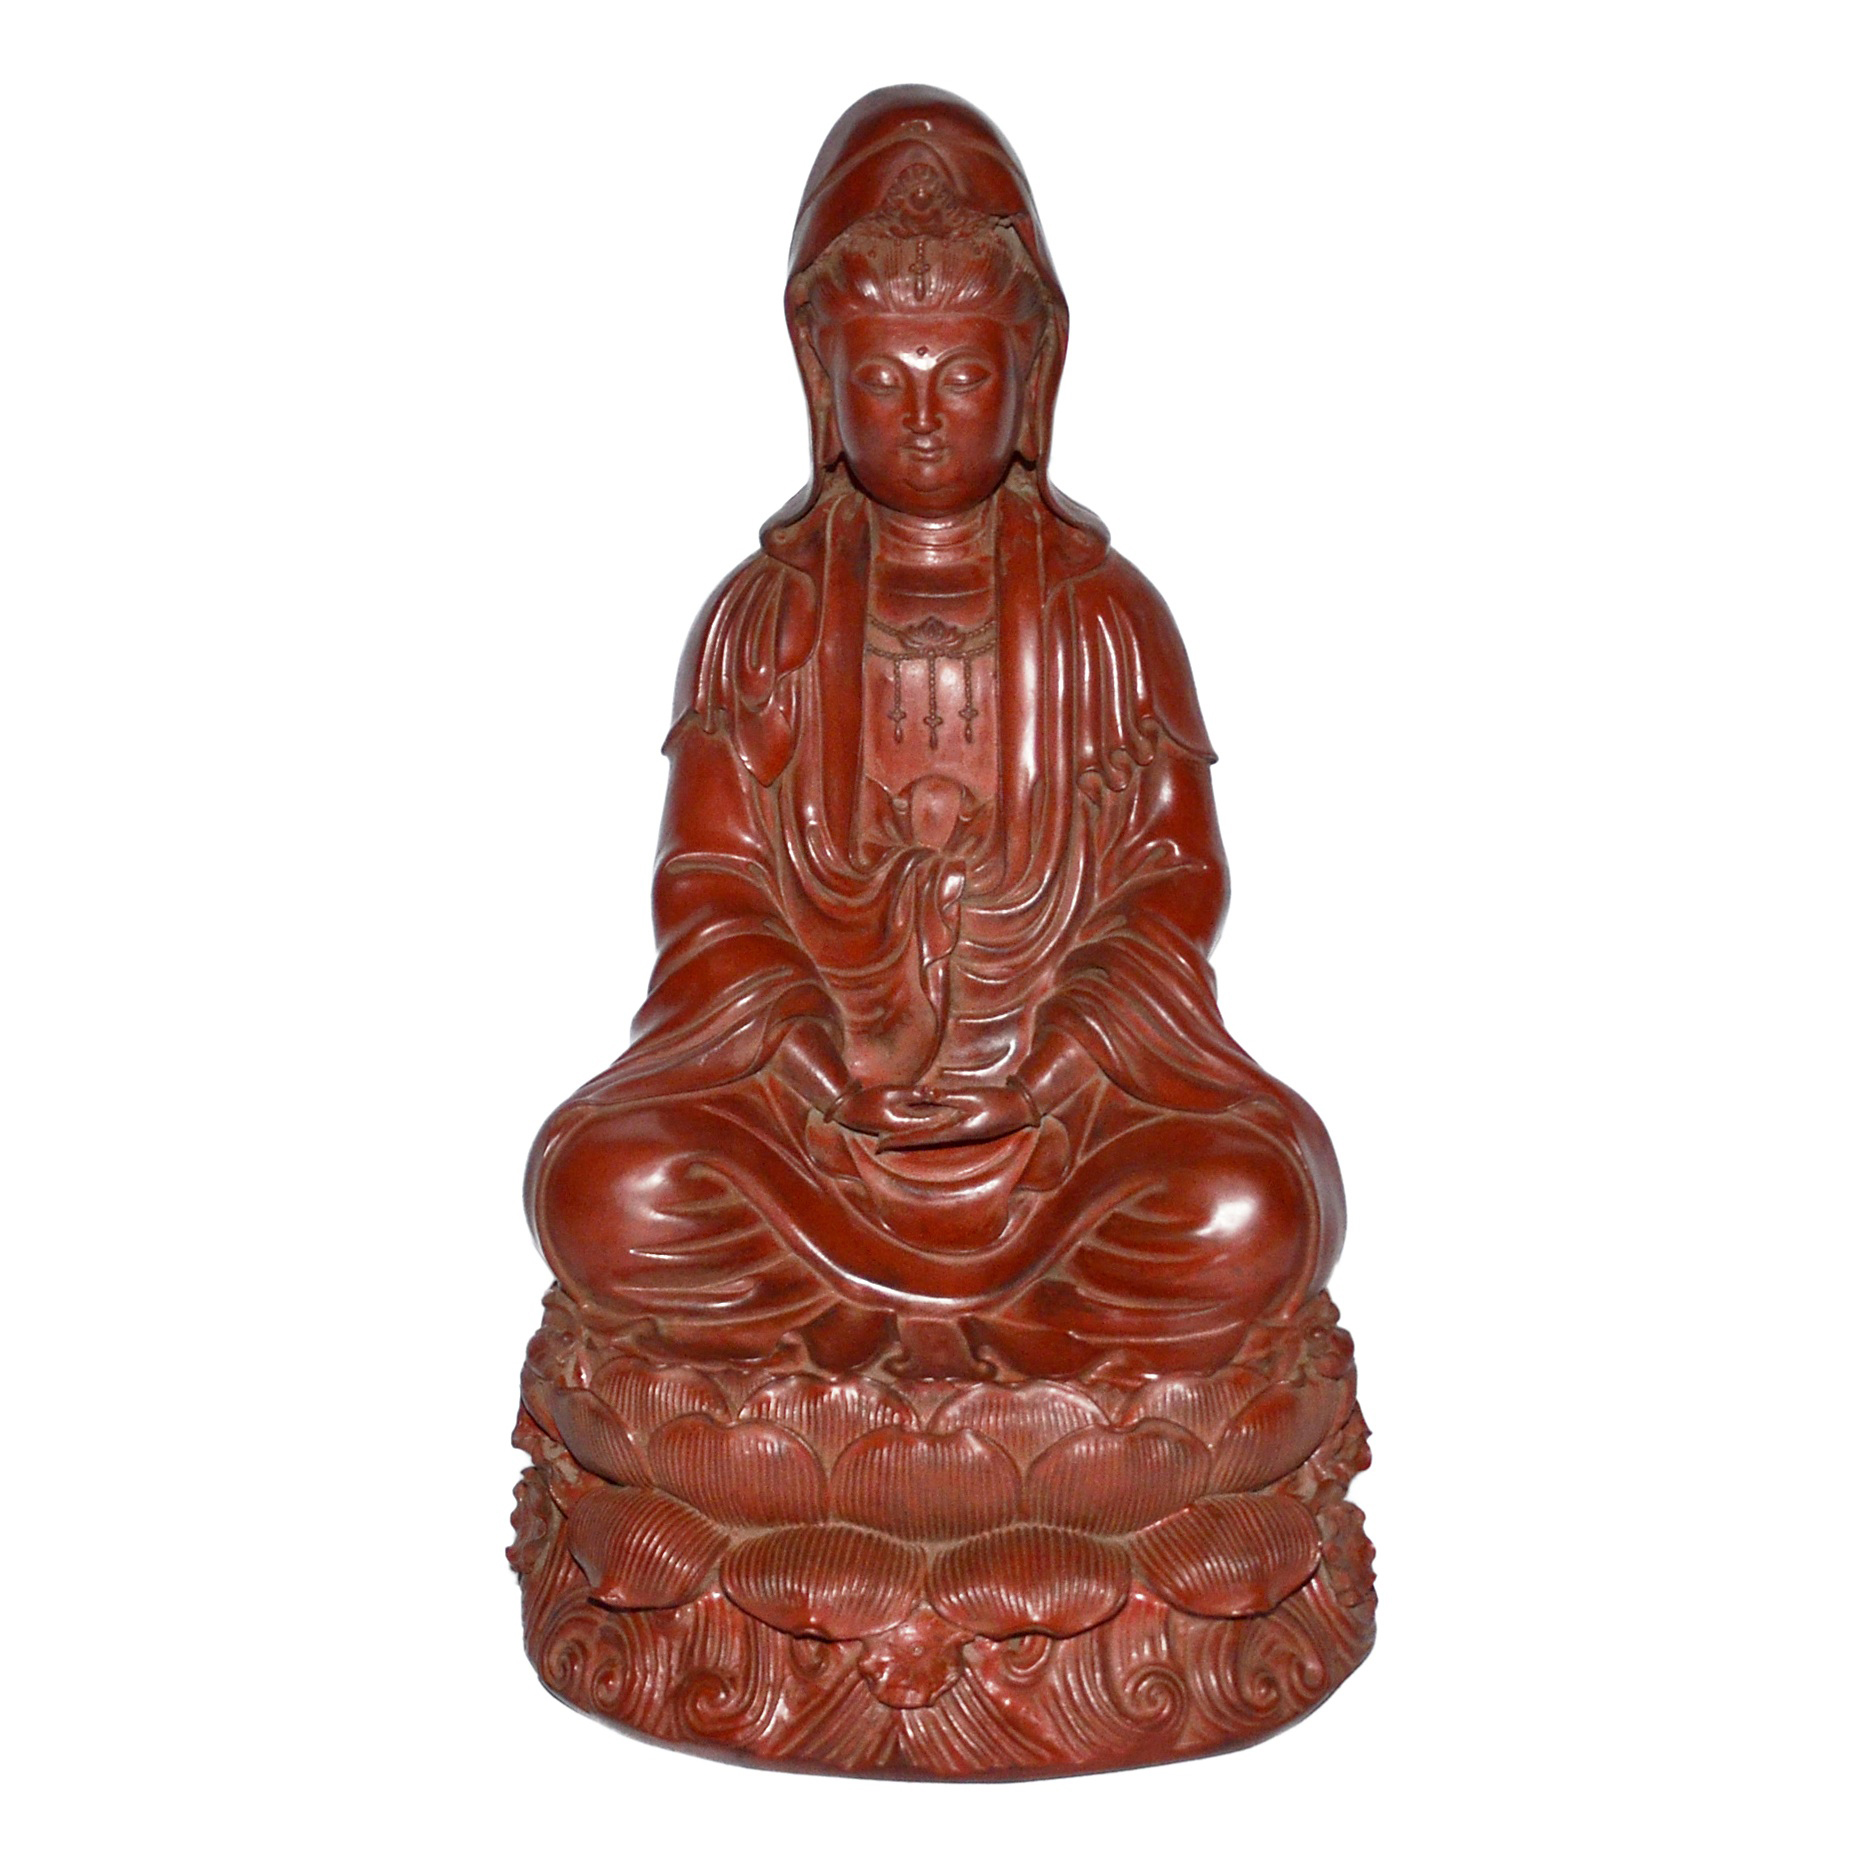 This tall statue of Guanyin is of starched linen, hollow in the center where molded clay was extracted. Coated with lacquer, it is a masterpiece of technique. Estimate: $8,000 - $15,000. Gianguan Auctions image